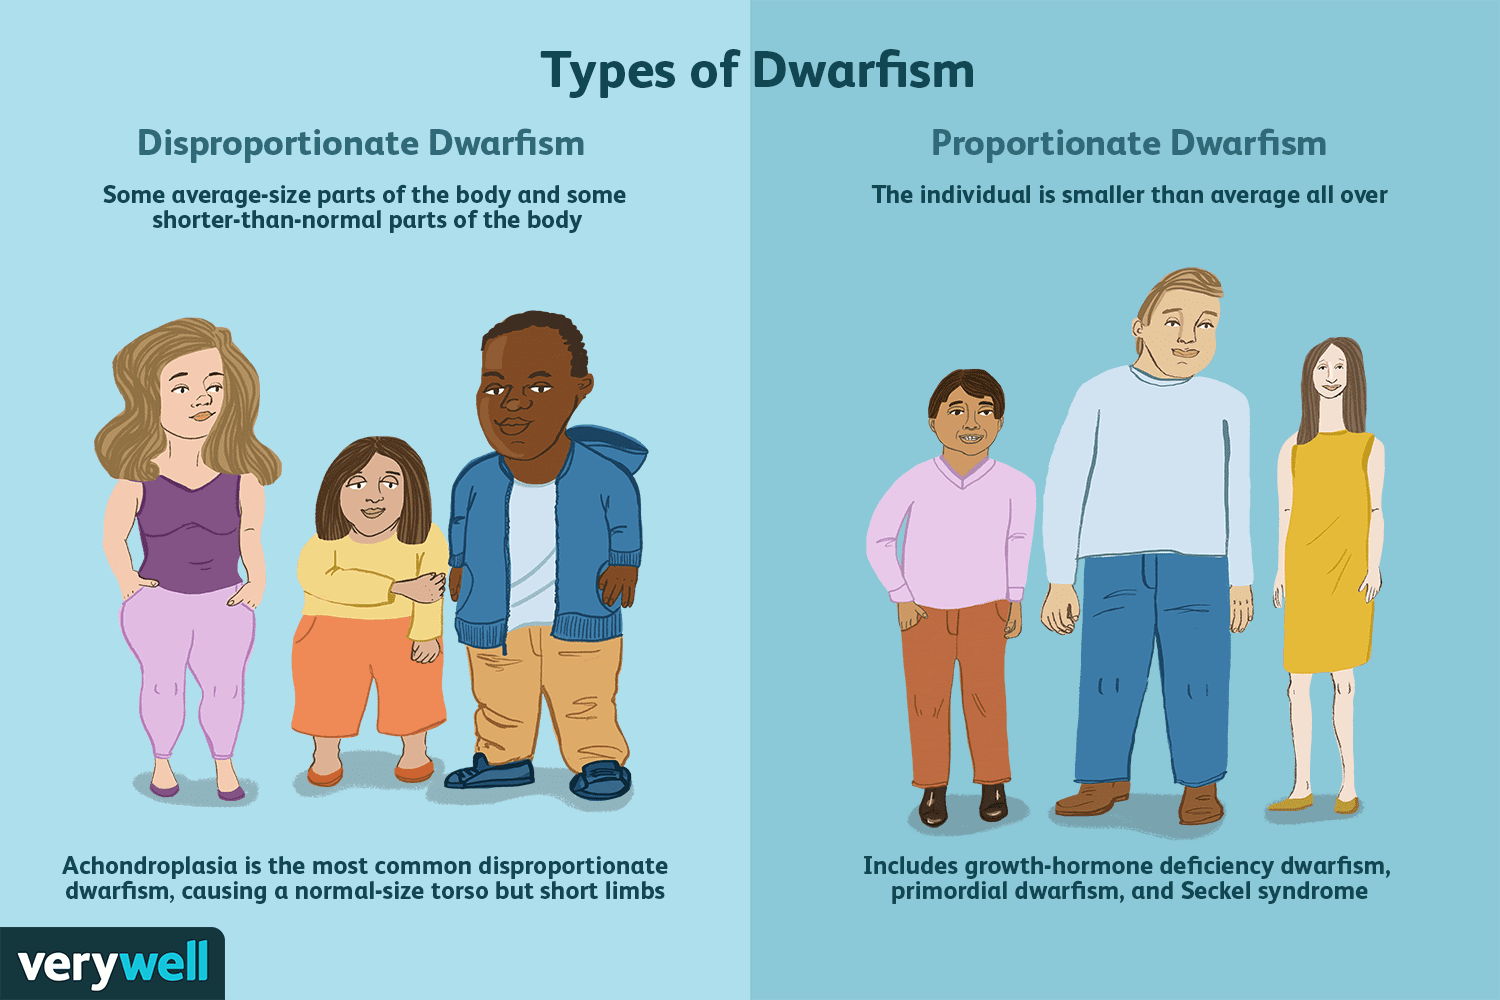 How many different types of dwarfism are there?